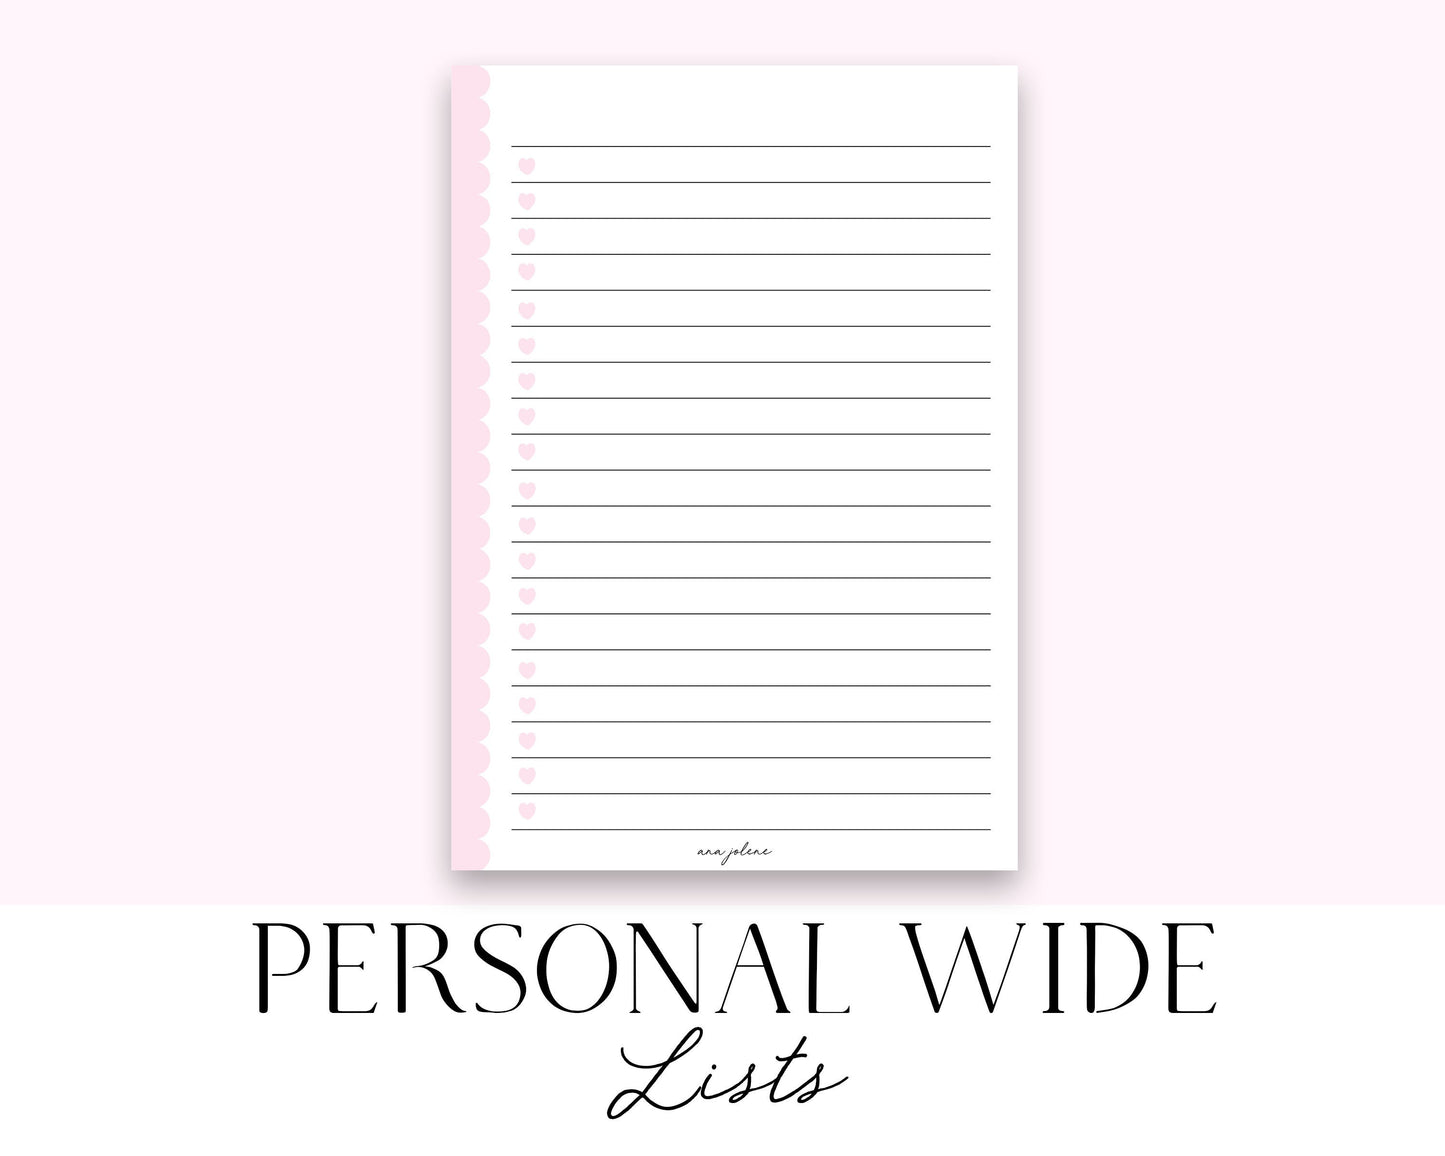 Personal Wide Rings To Do Lists Printable